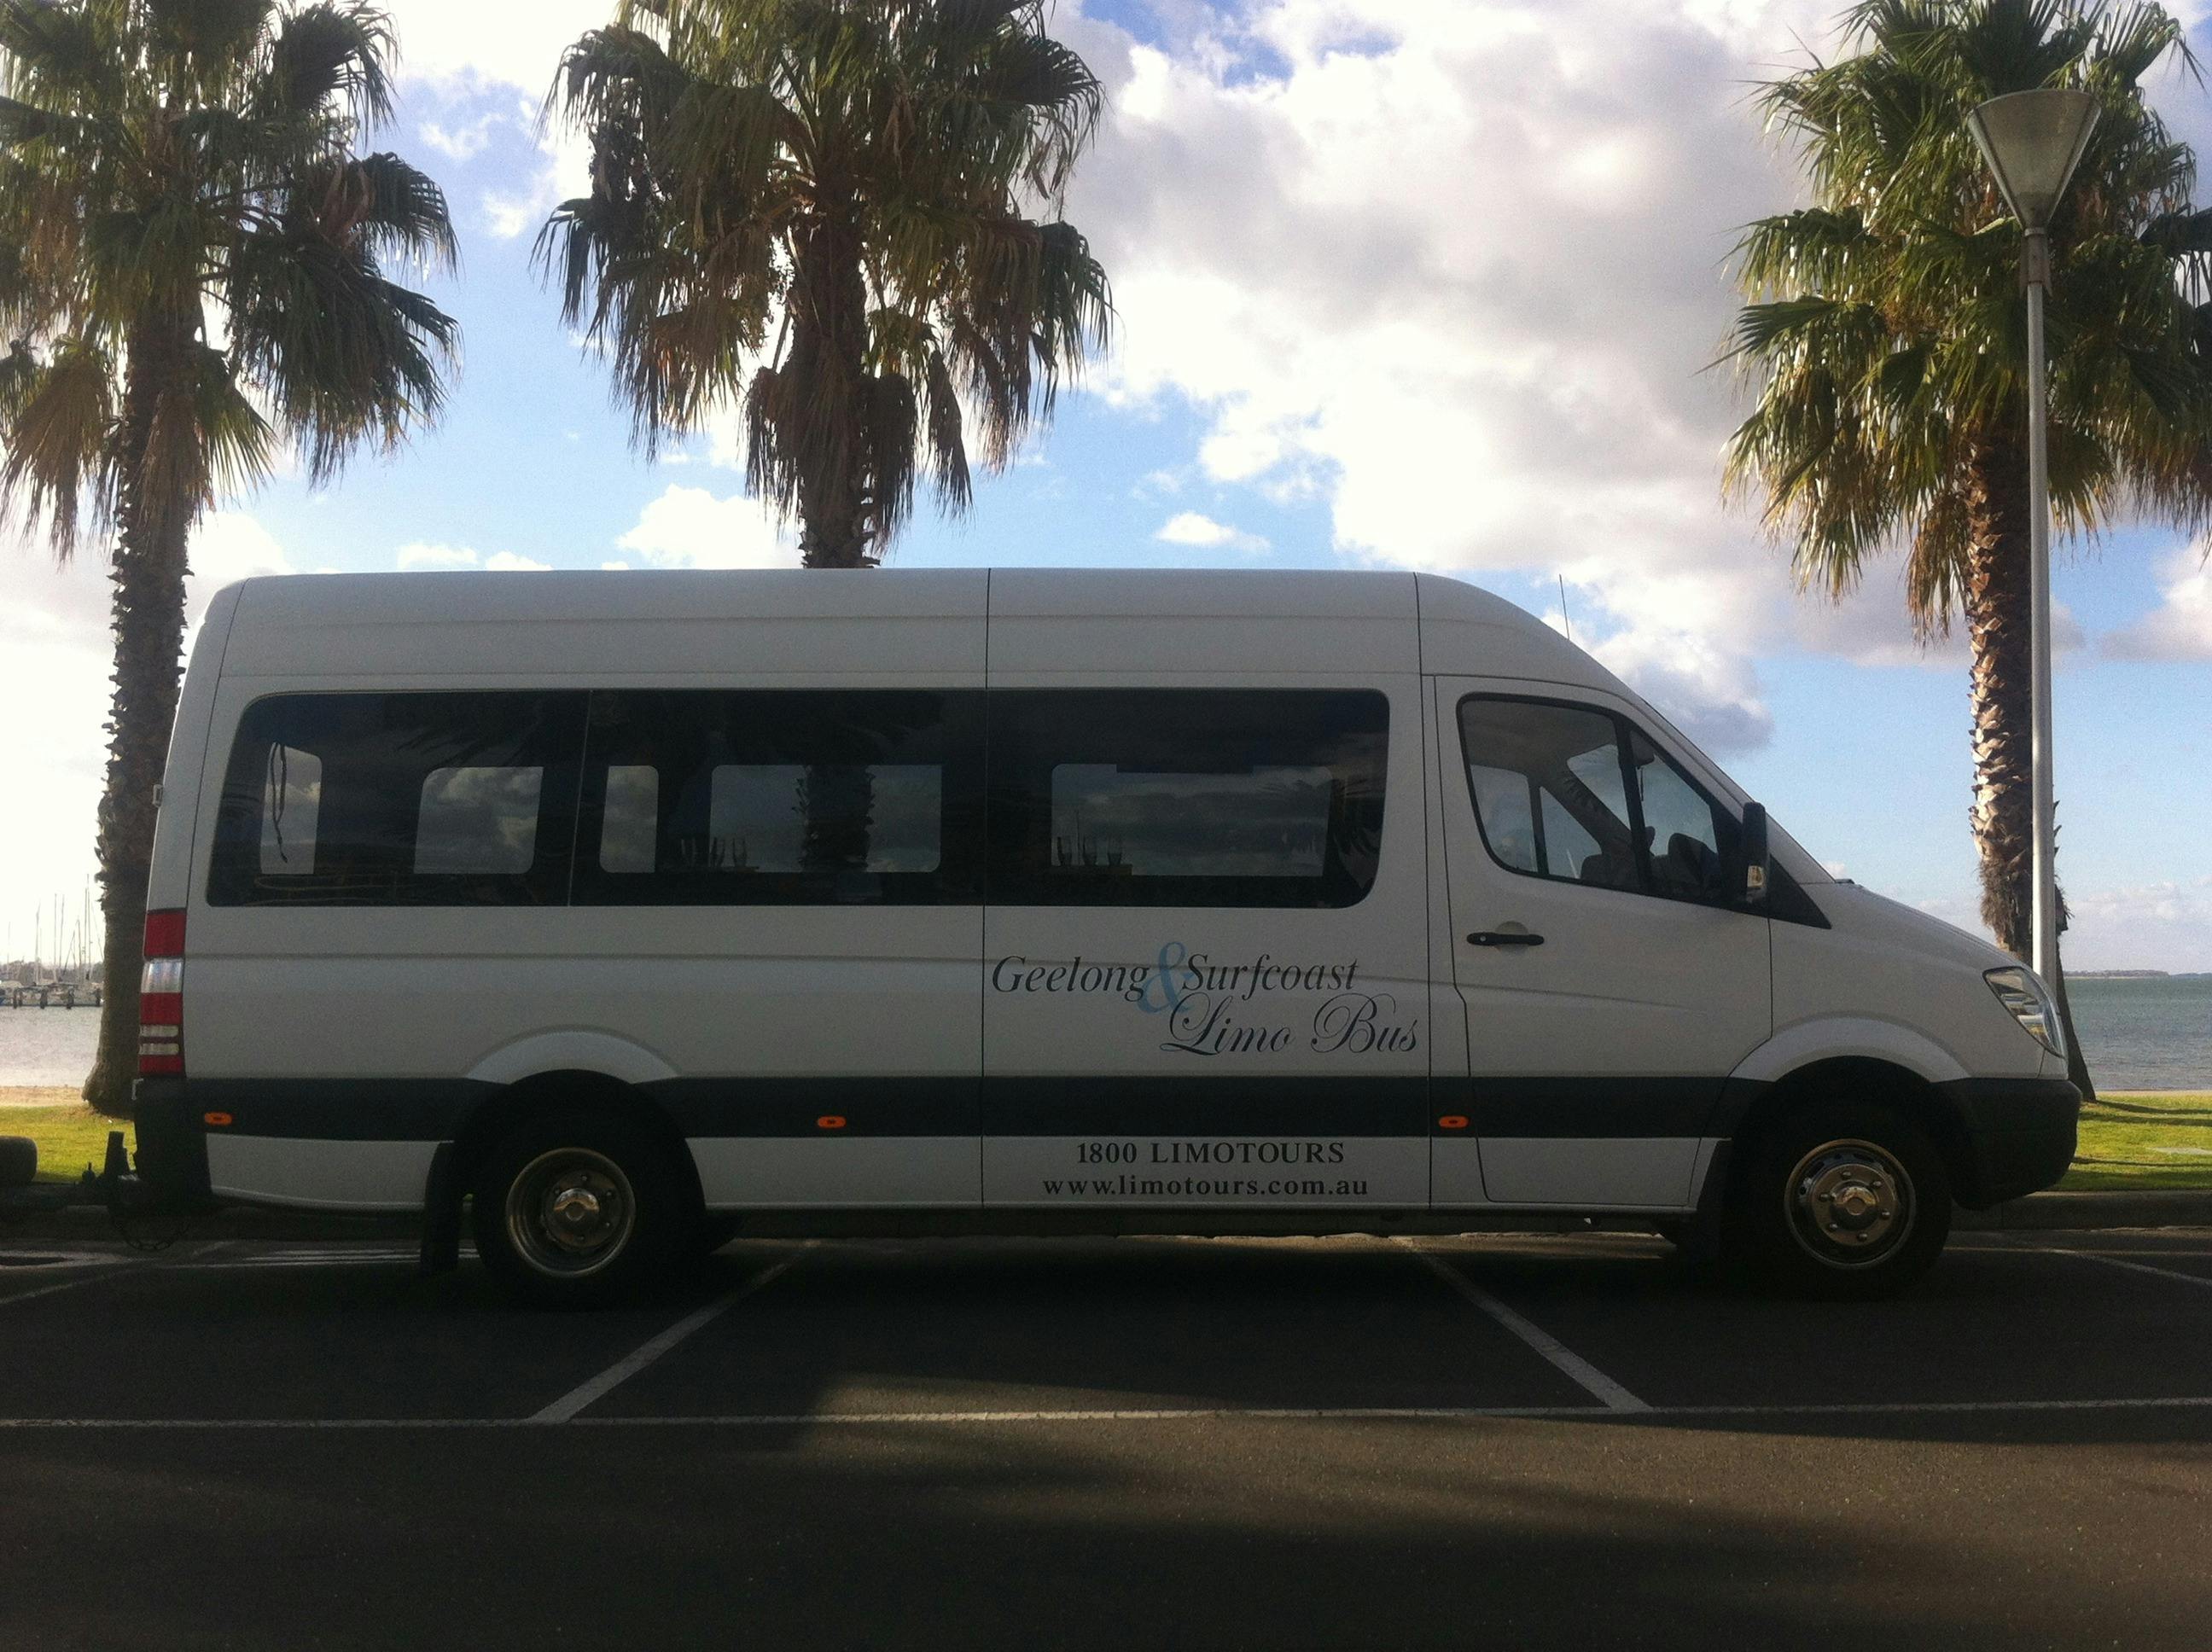 Geelong and Surfcoast Limo Bus